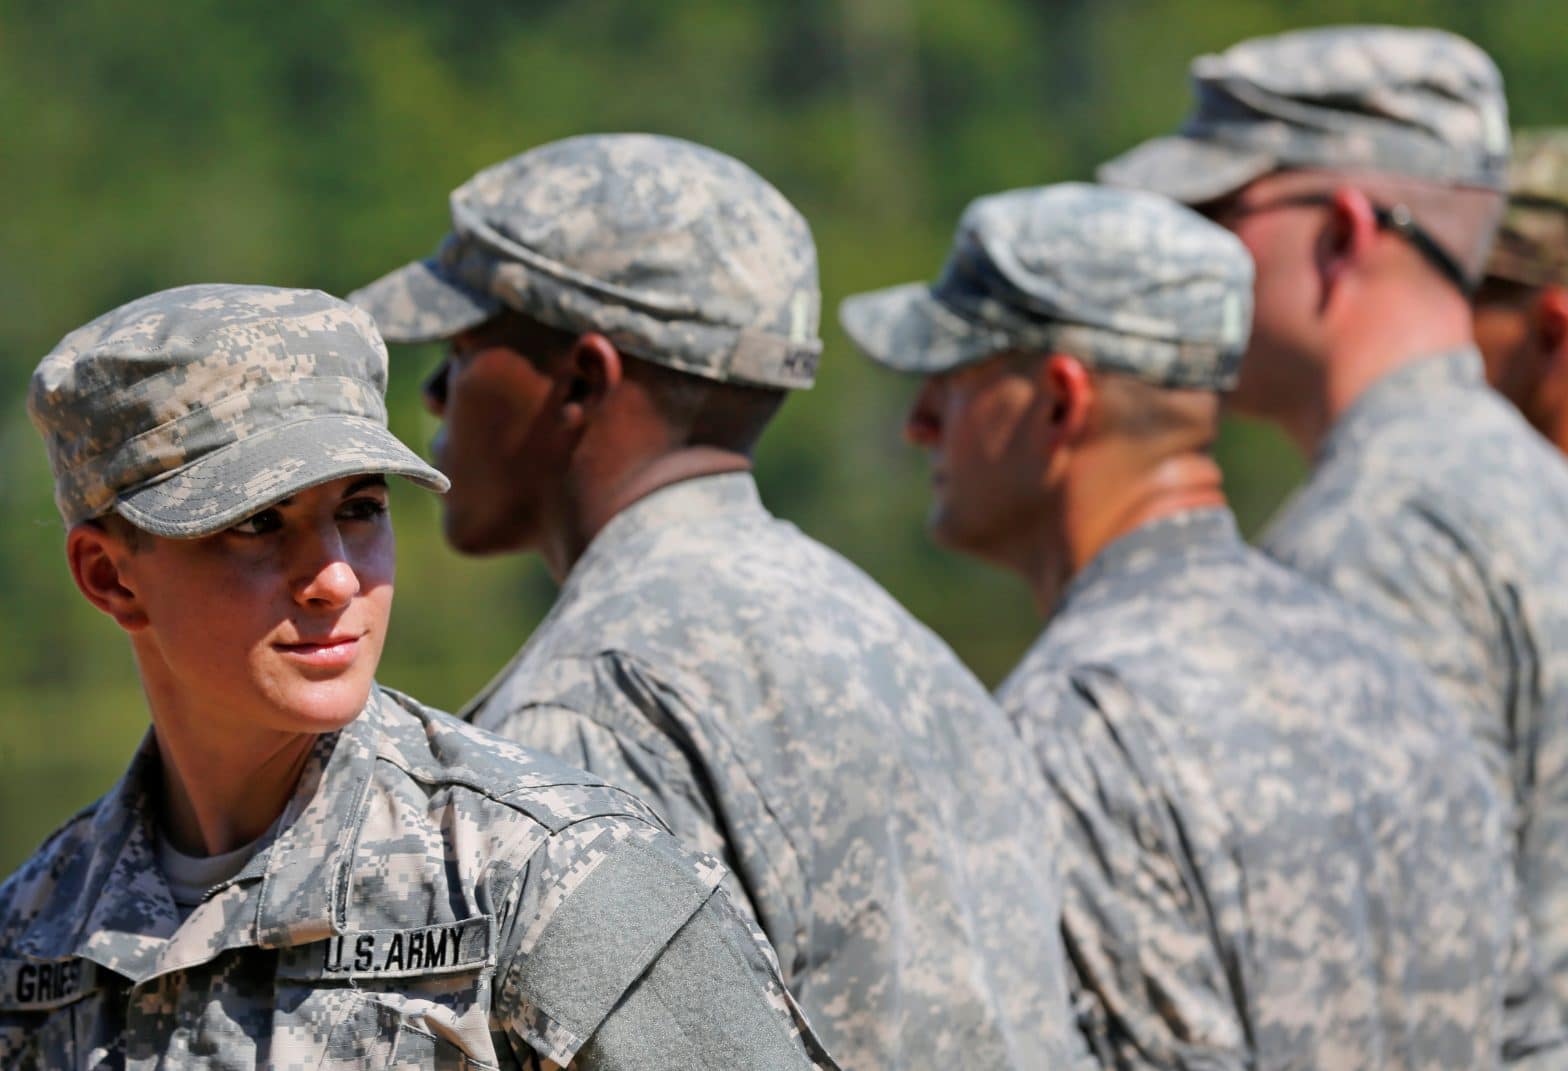 Judge Rules US Military Can’t Discharge HIV-Positive Troops